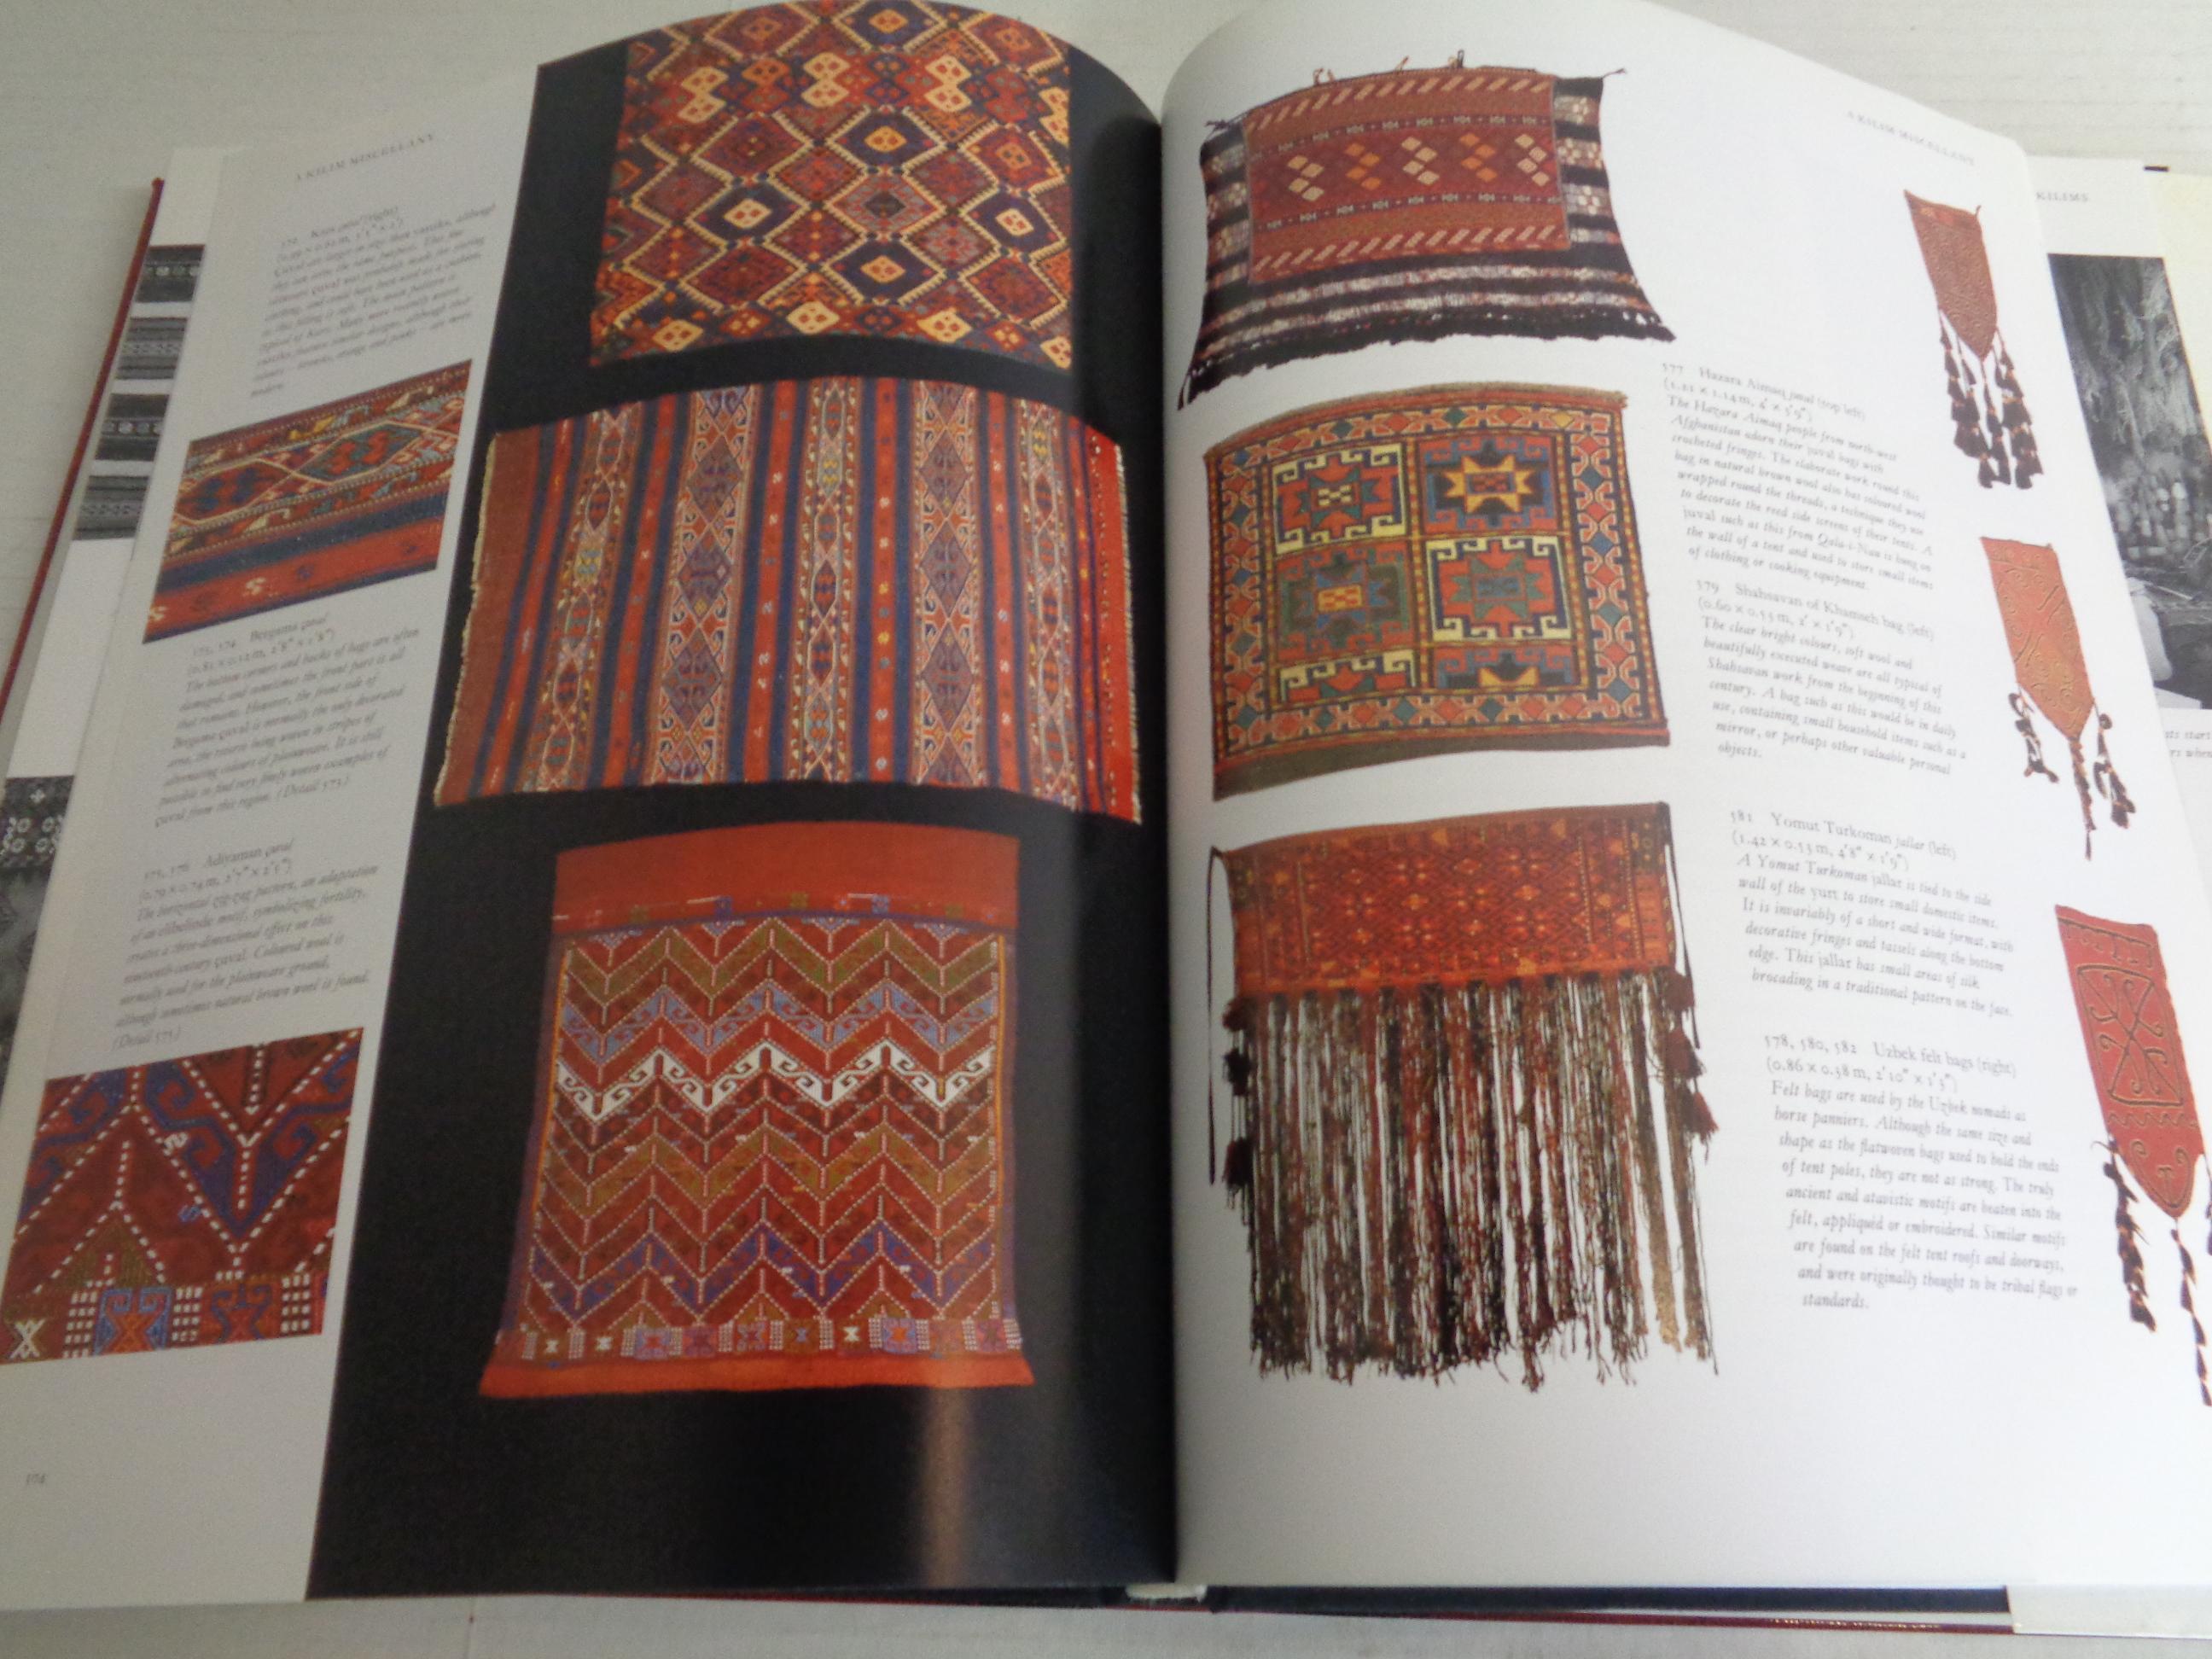 KILIM: The Complete Guide - 1993 Chronicle Books - 1st Edition For Sale 11